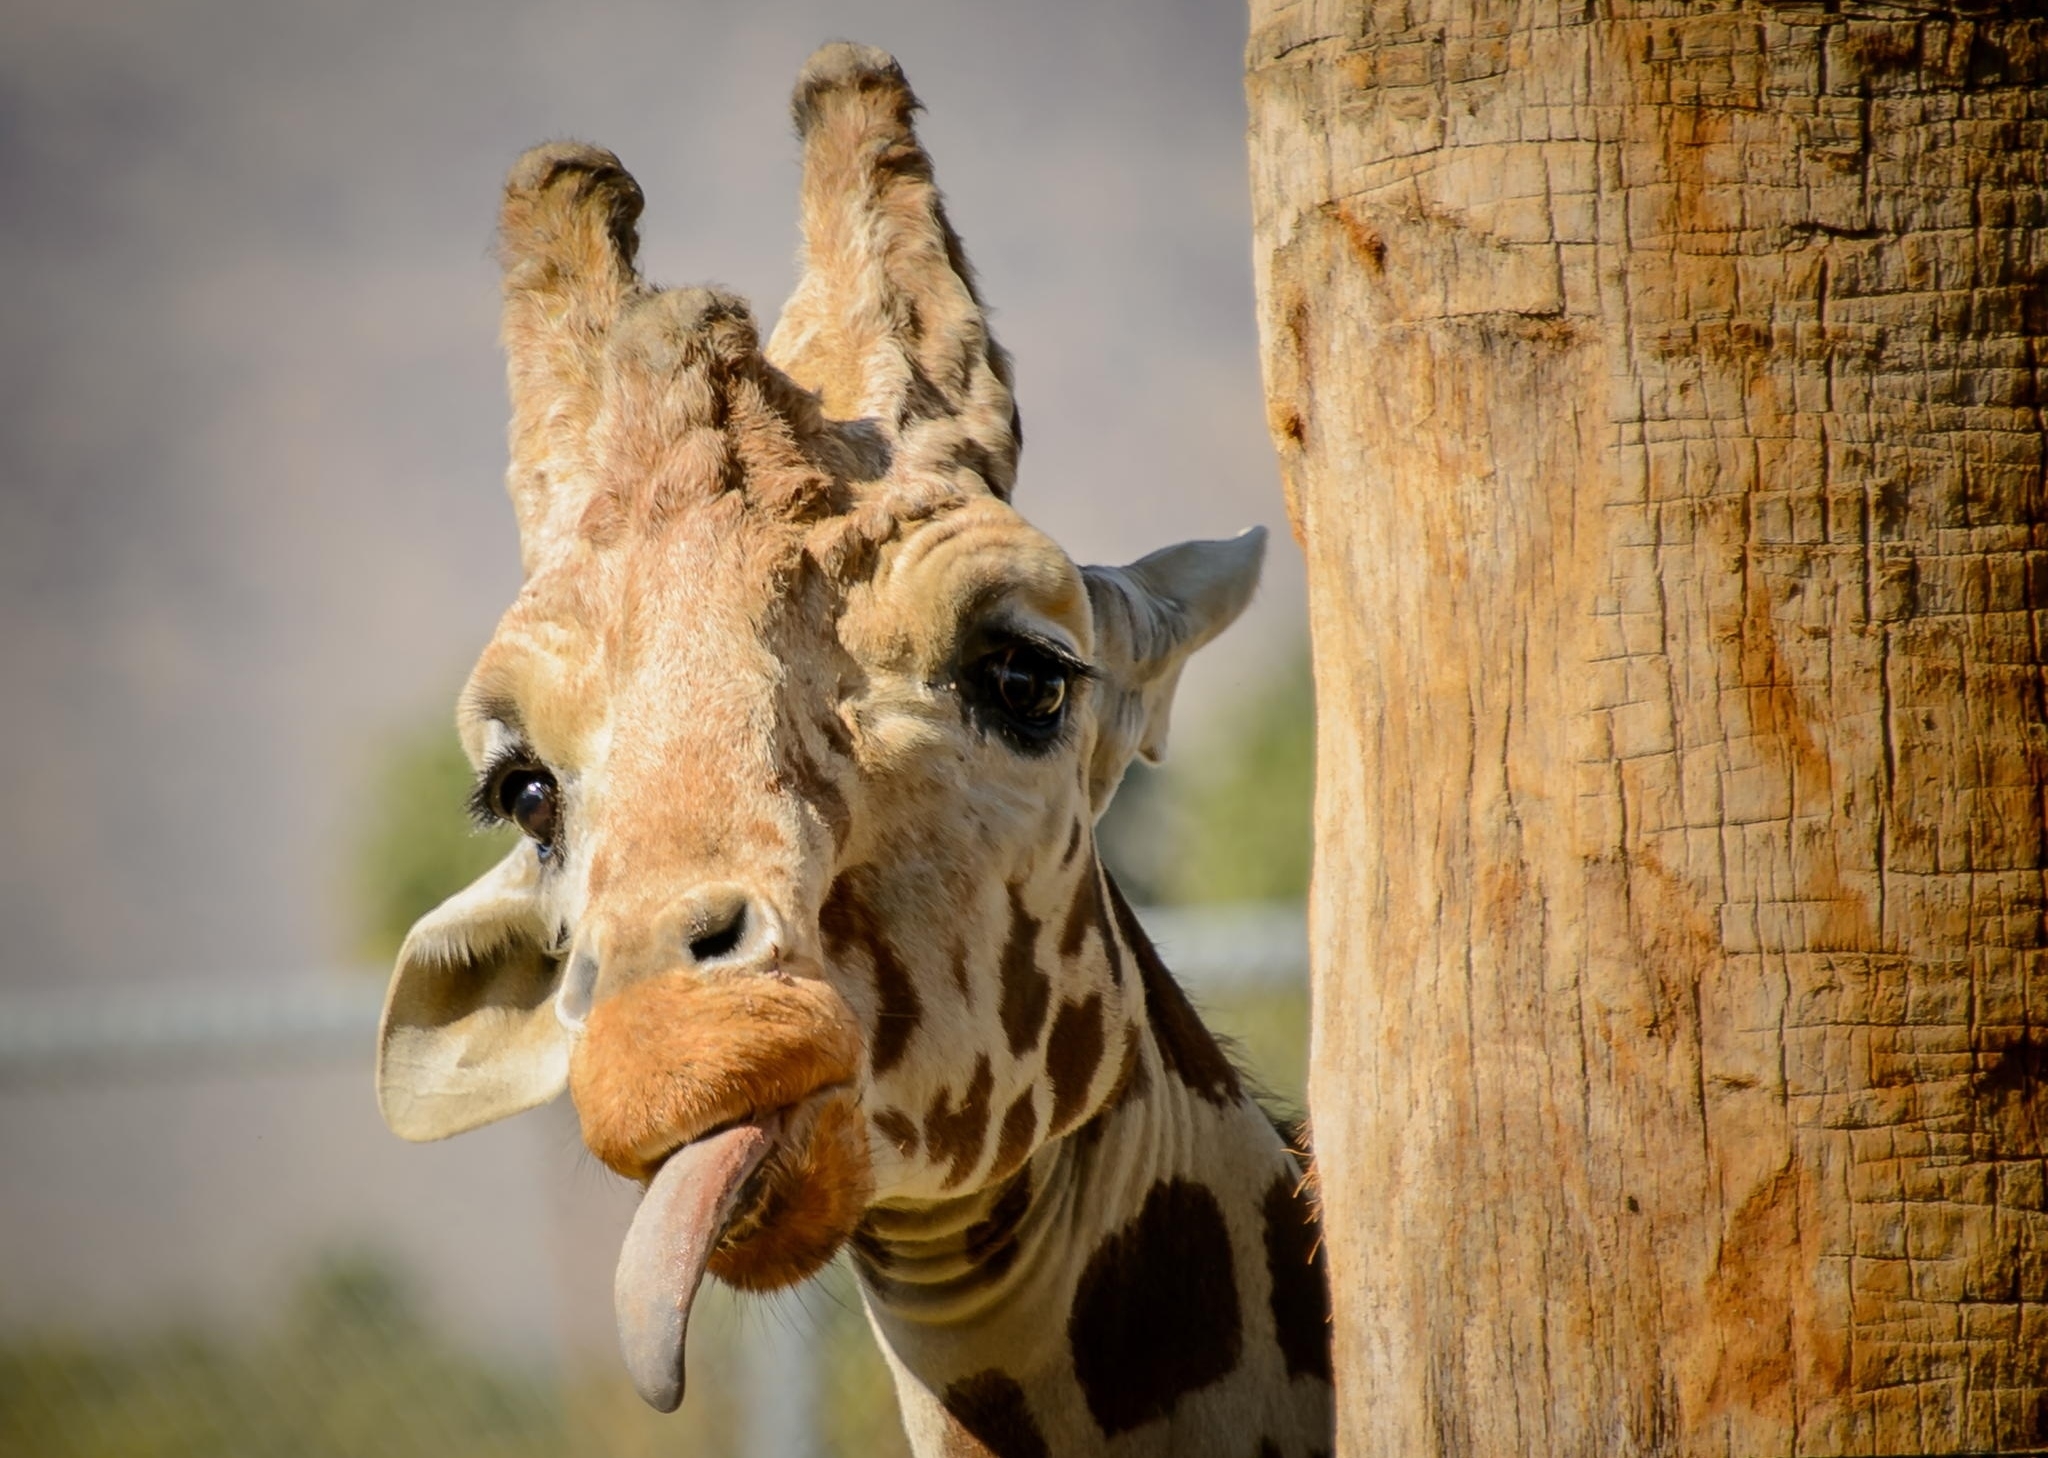 The giraffe wiggles and shows its tongue